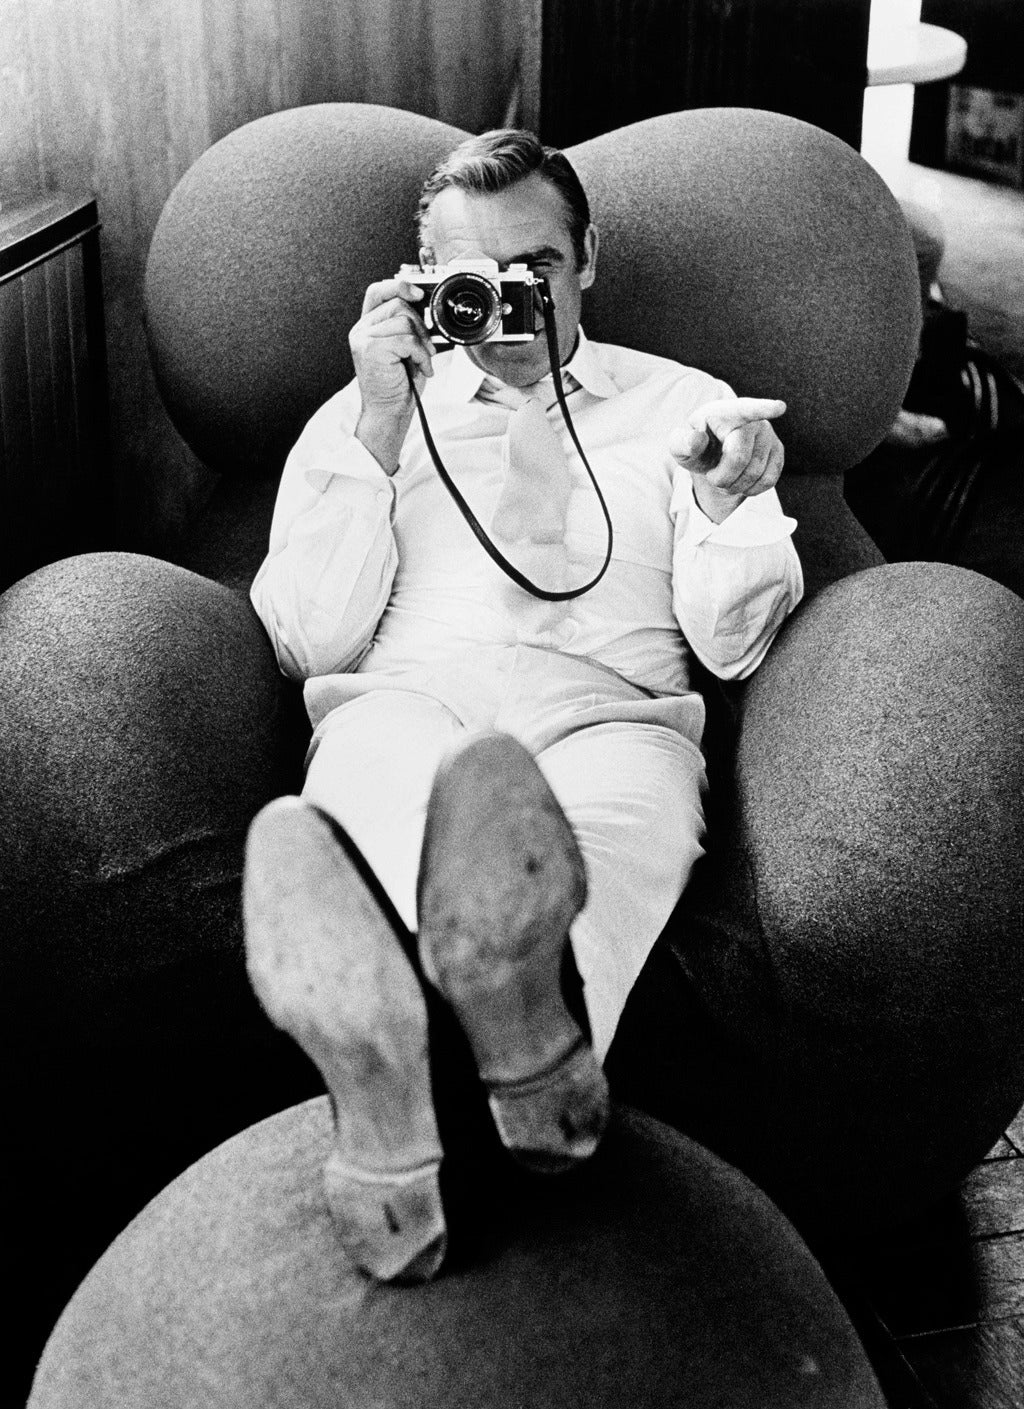 Sean Connery, Las Vegas
1971 (printed later)
silver gelatin print
108 x 72 inches
edition of 25
signed and numbered

Scottish actor Sean Connery peers through a camera on the set of the James Bond film 'Diamonds Are Forever', Las Vegas 1971.

Terry